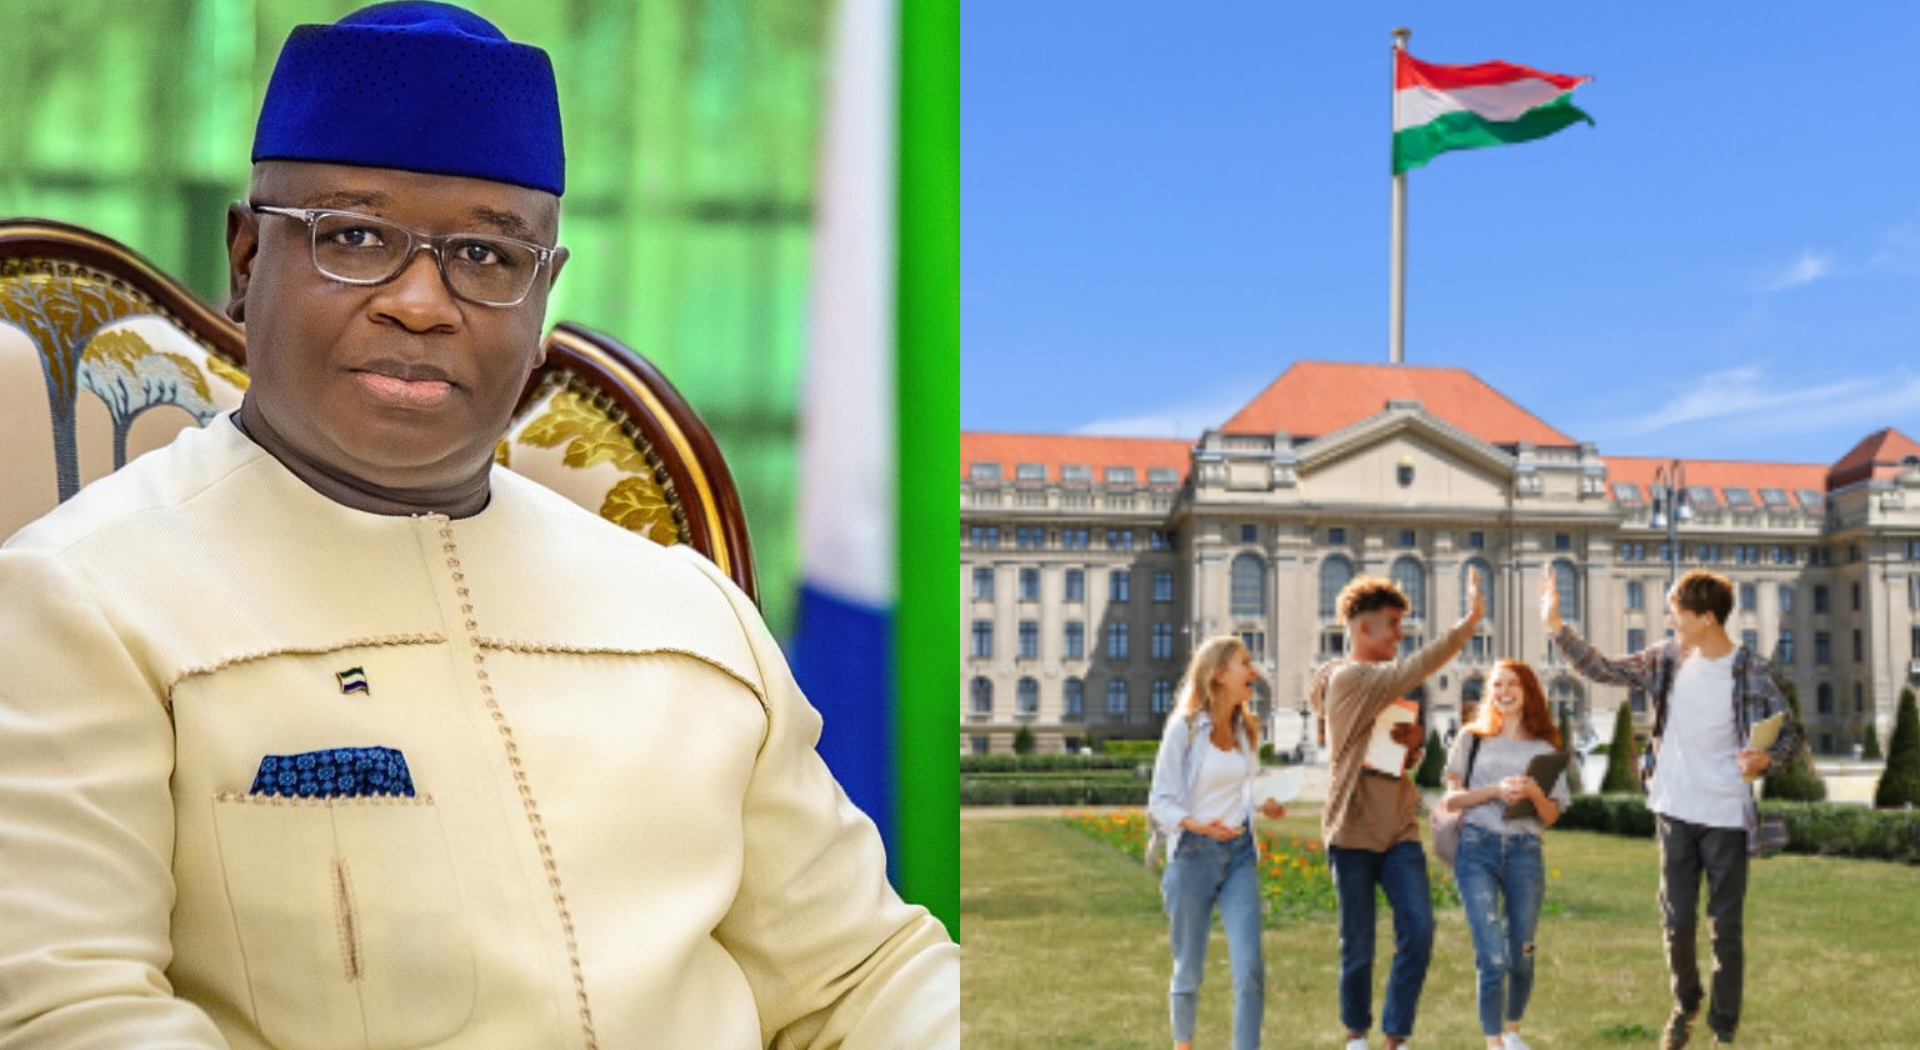 Sierra Leone Government Announces Scholarship Offer to Study in Hungary